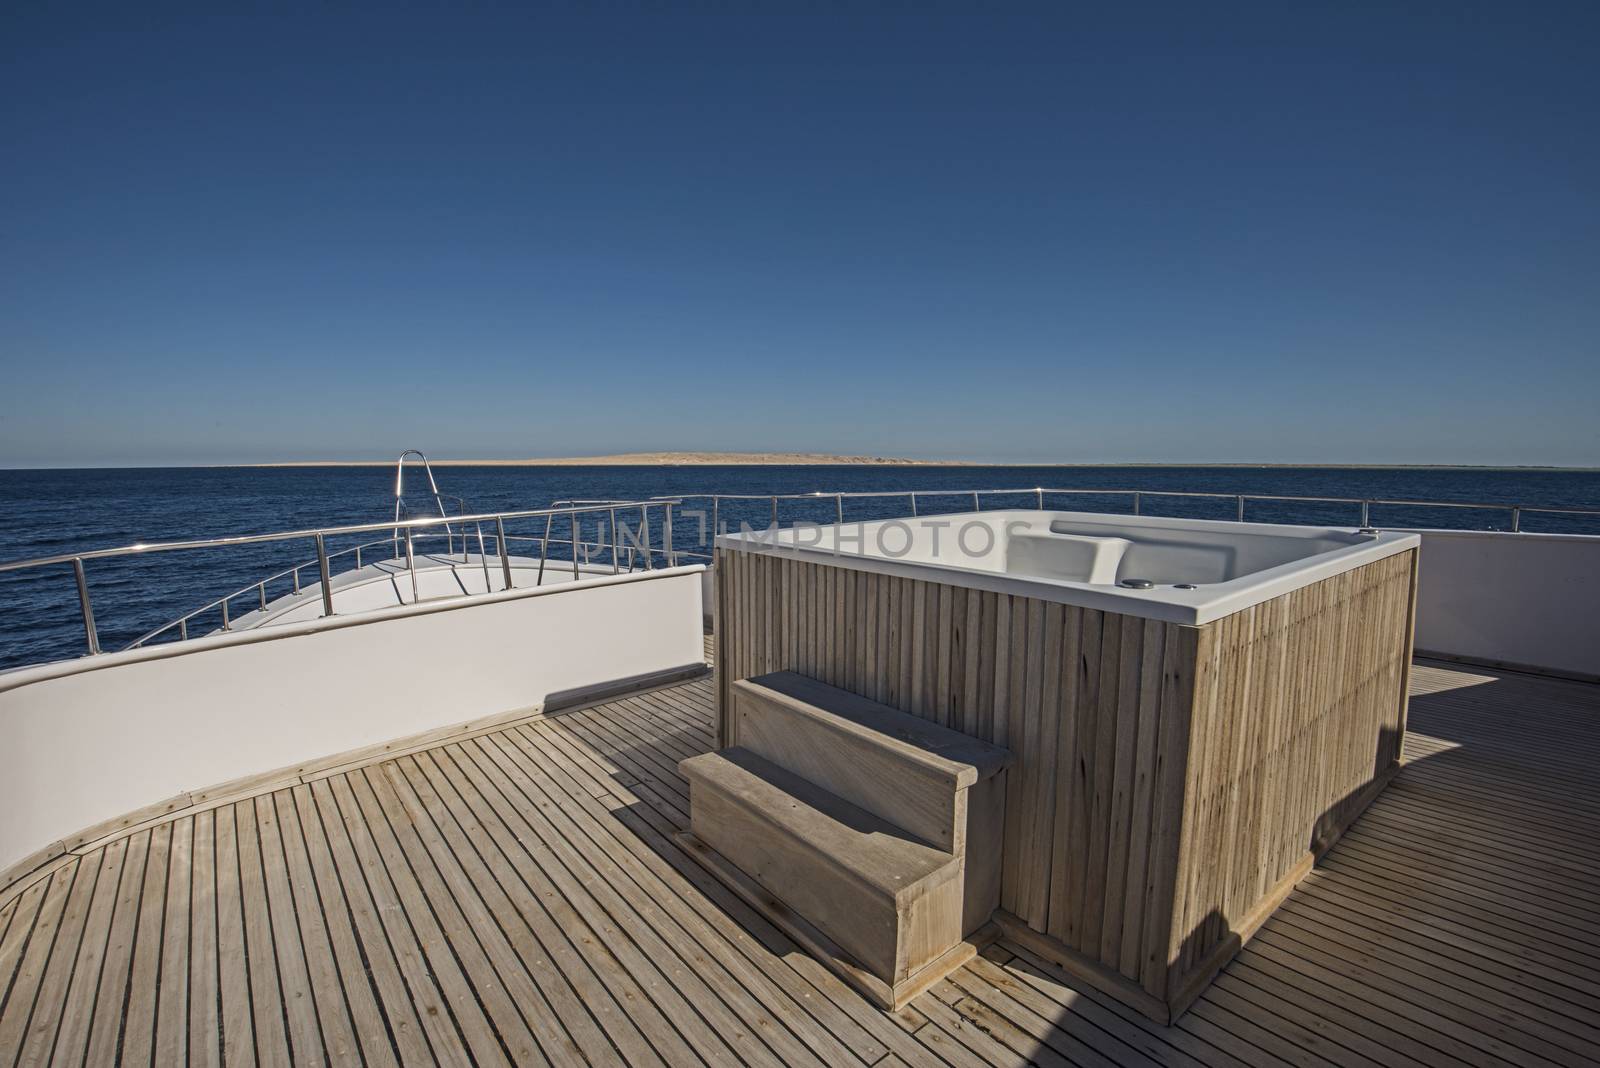 View over the bow of a large luxury motor yacht on tropical open ocean with hot tub